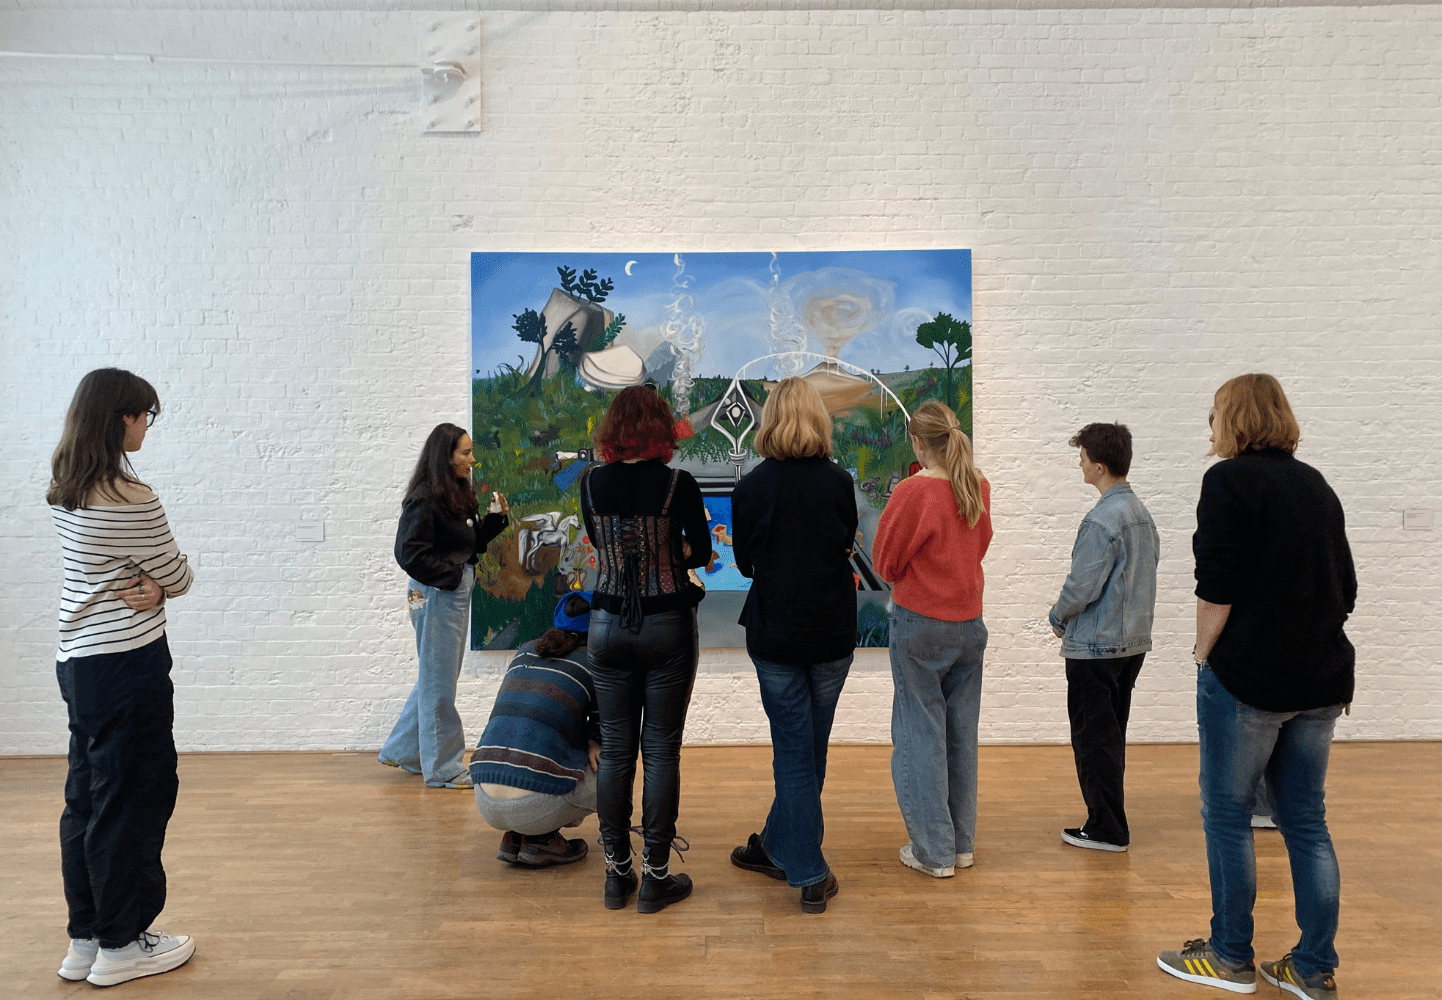 A group of young people are gathered around a painting by Frieda Toranzo Jaeger in an large bright art gallery